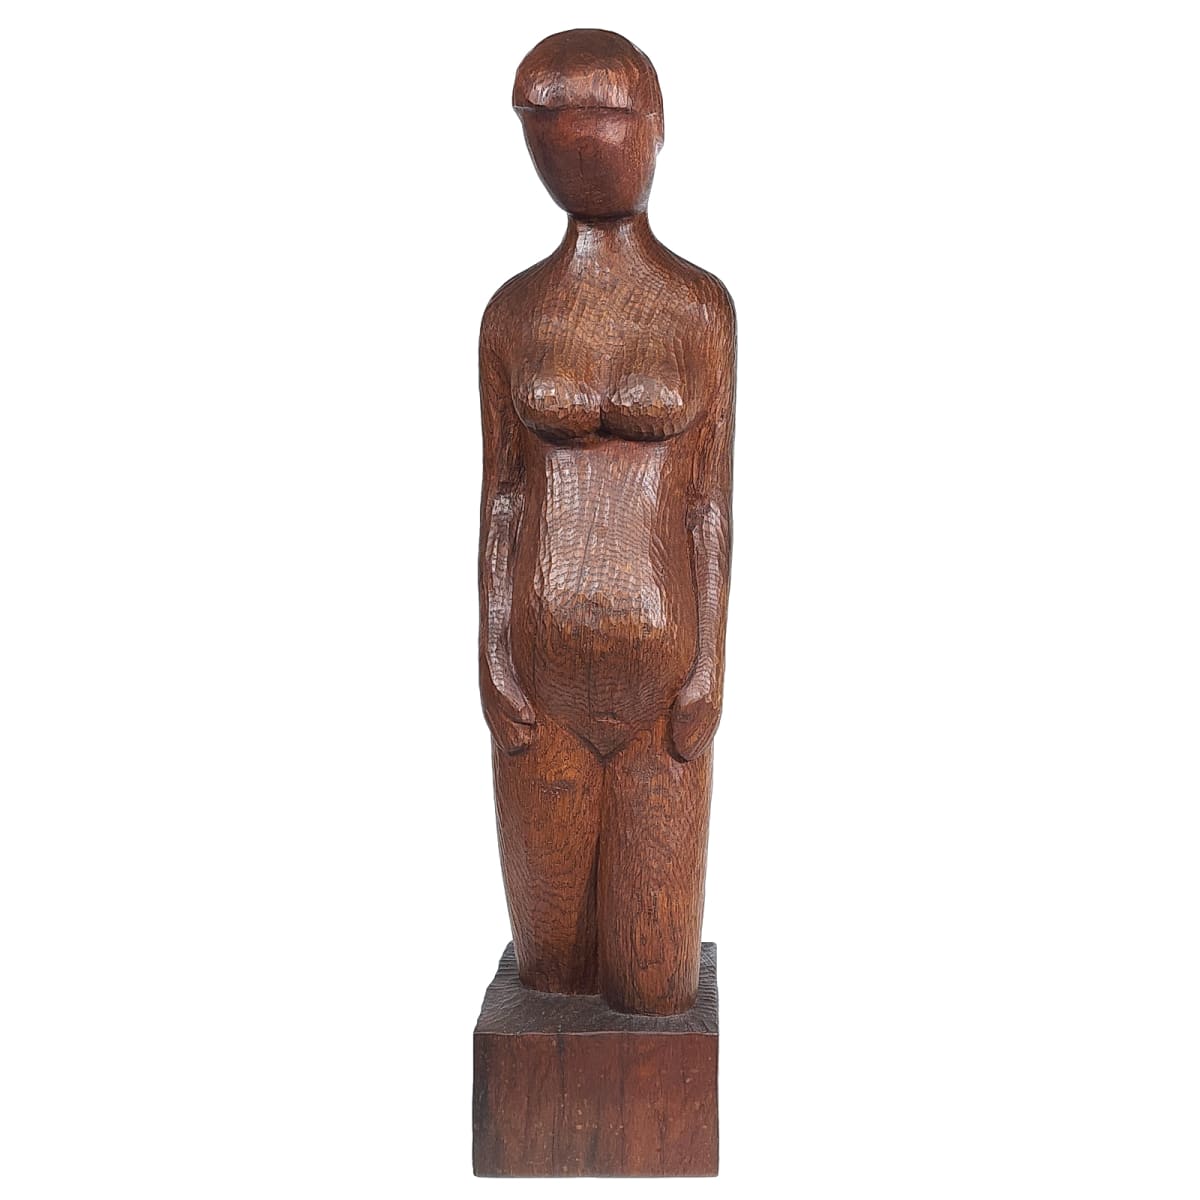 UNTITLED [ Standing woman figure ] by Axel Hansen 